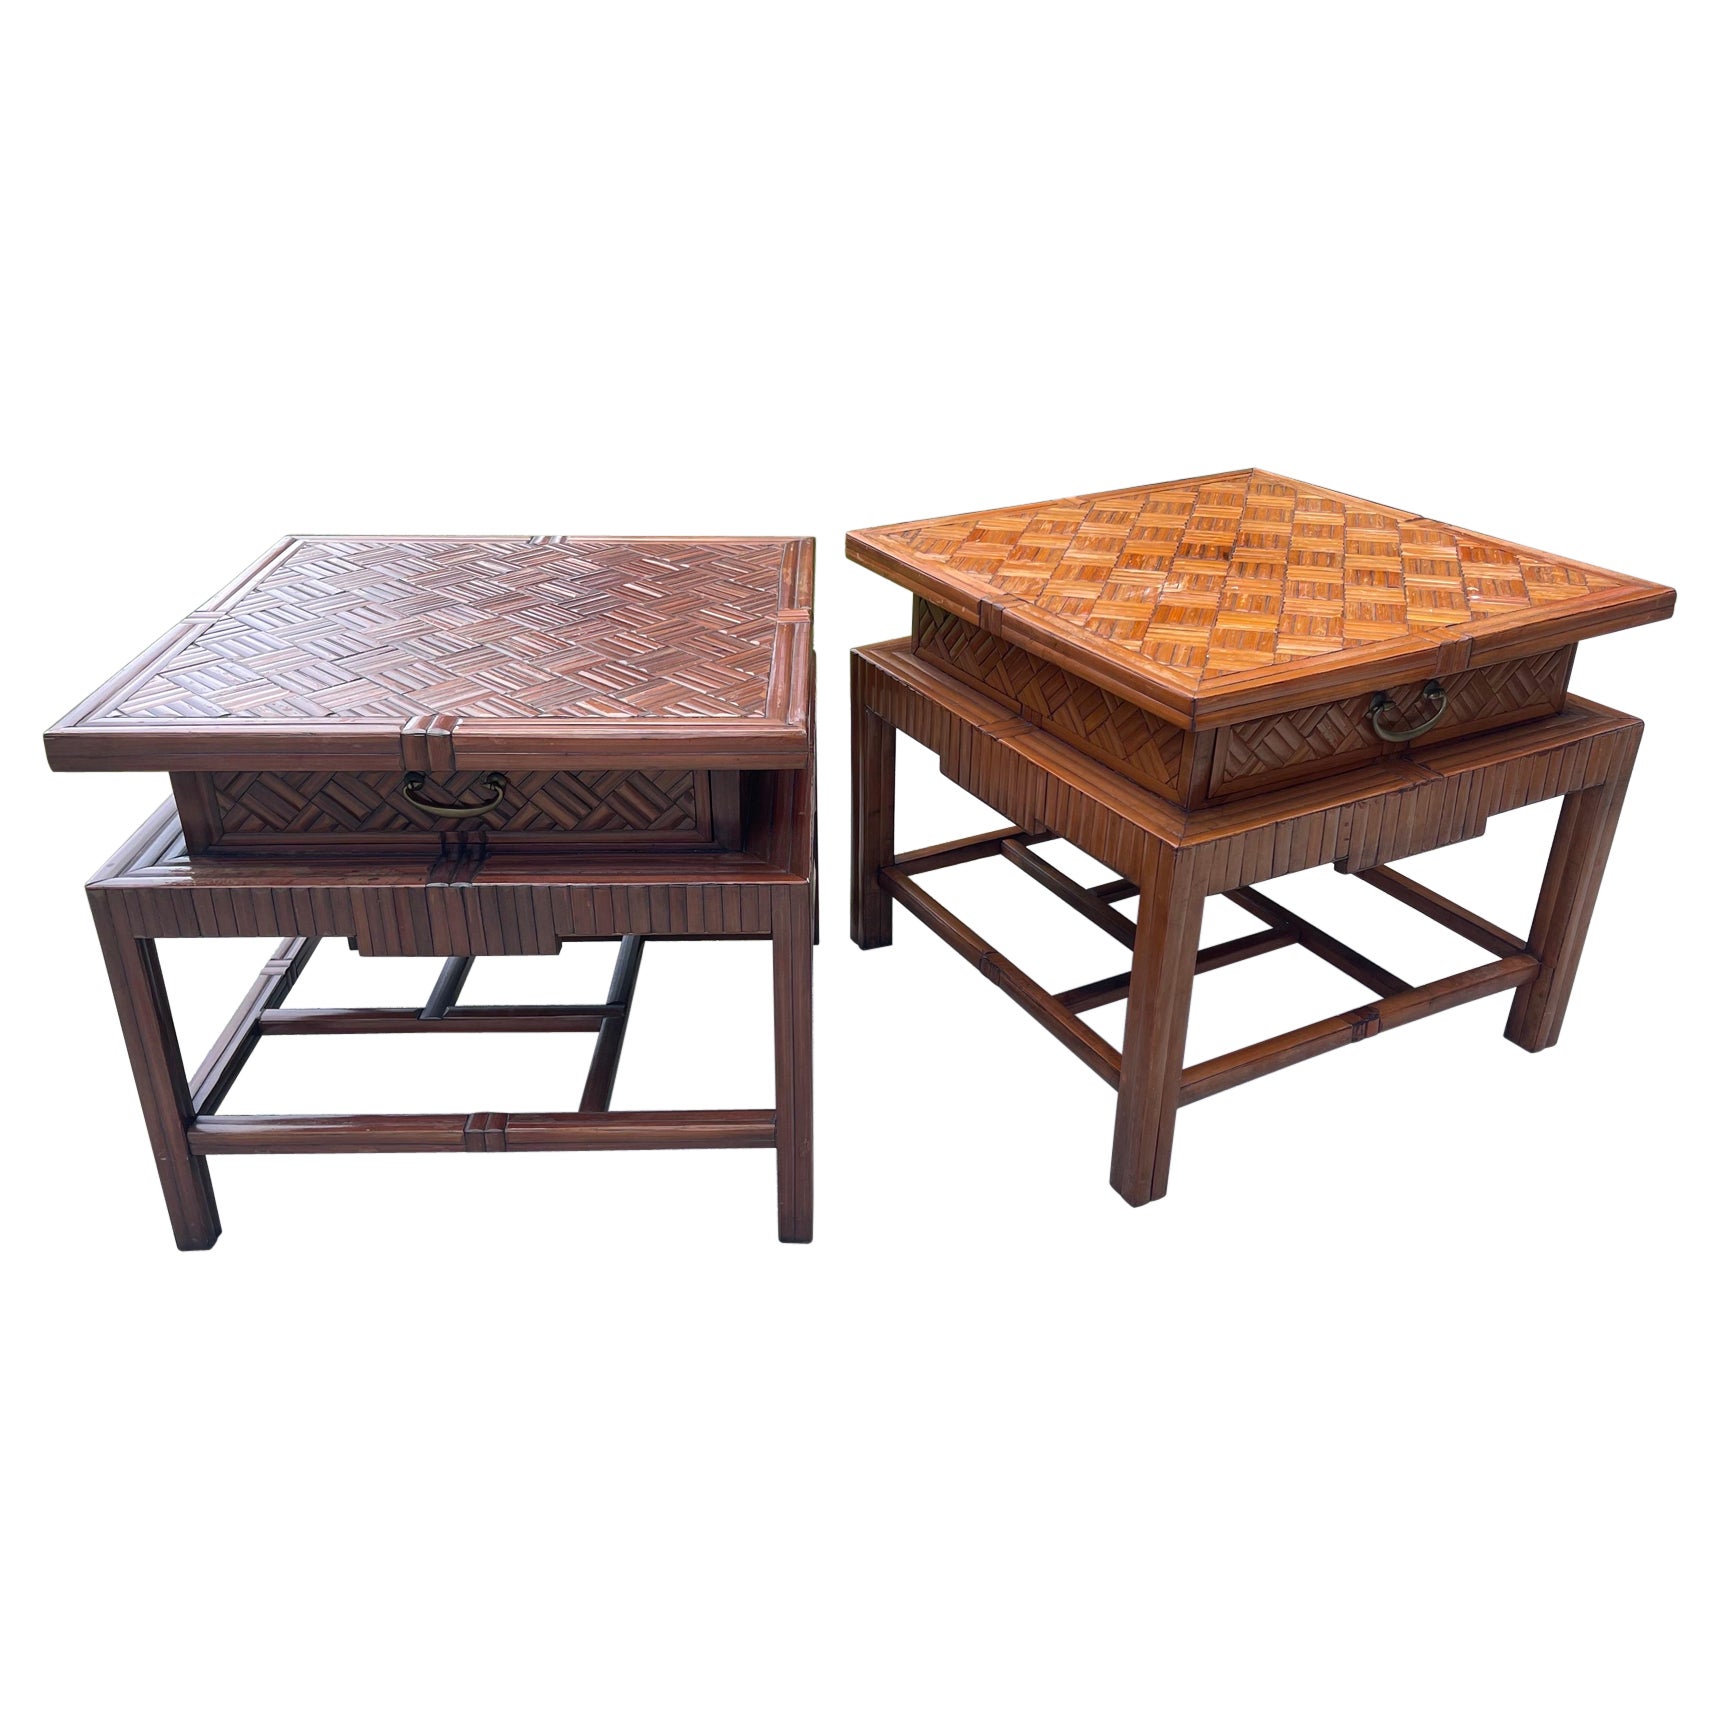 1940s Korean Bamboo Pagoda Side Tables or Nightstands with Drawers, a Pair